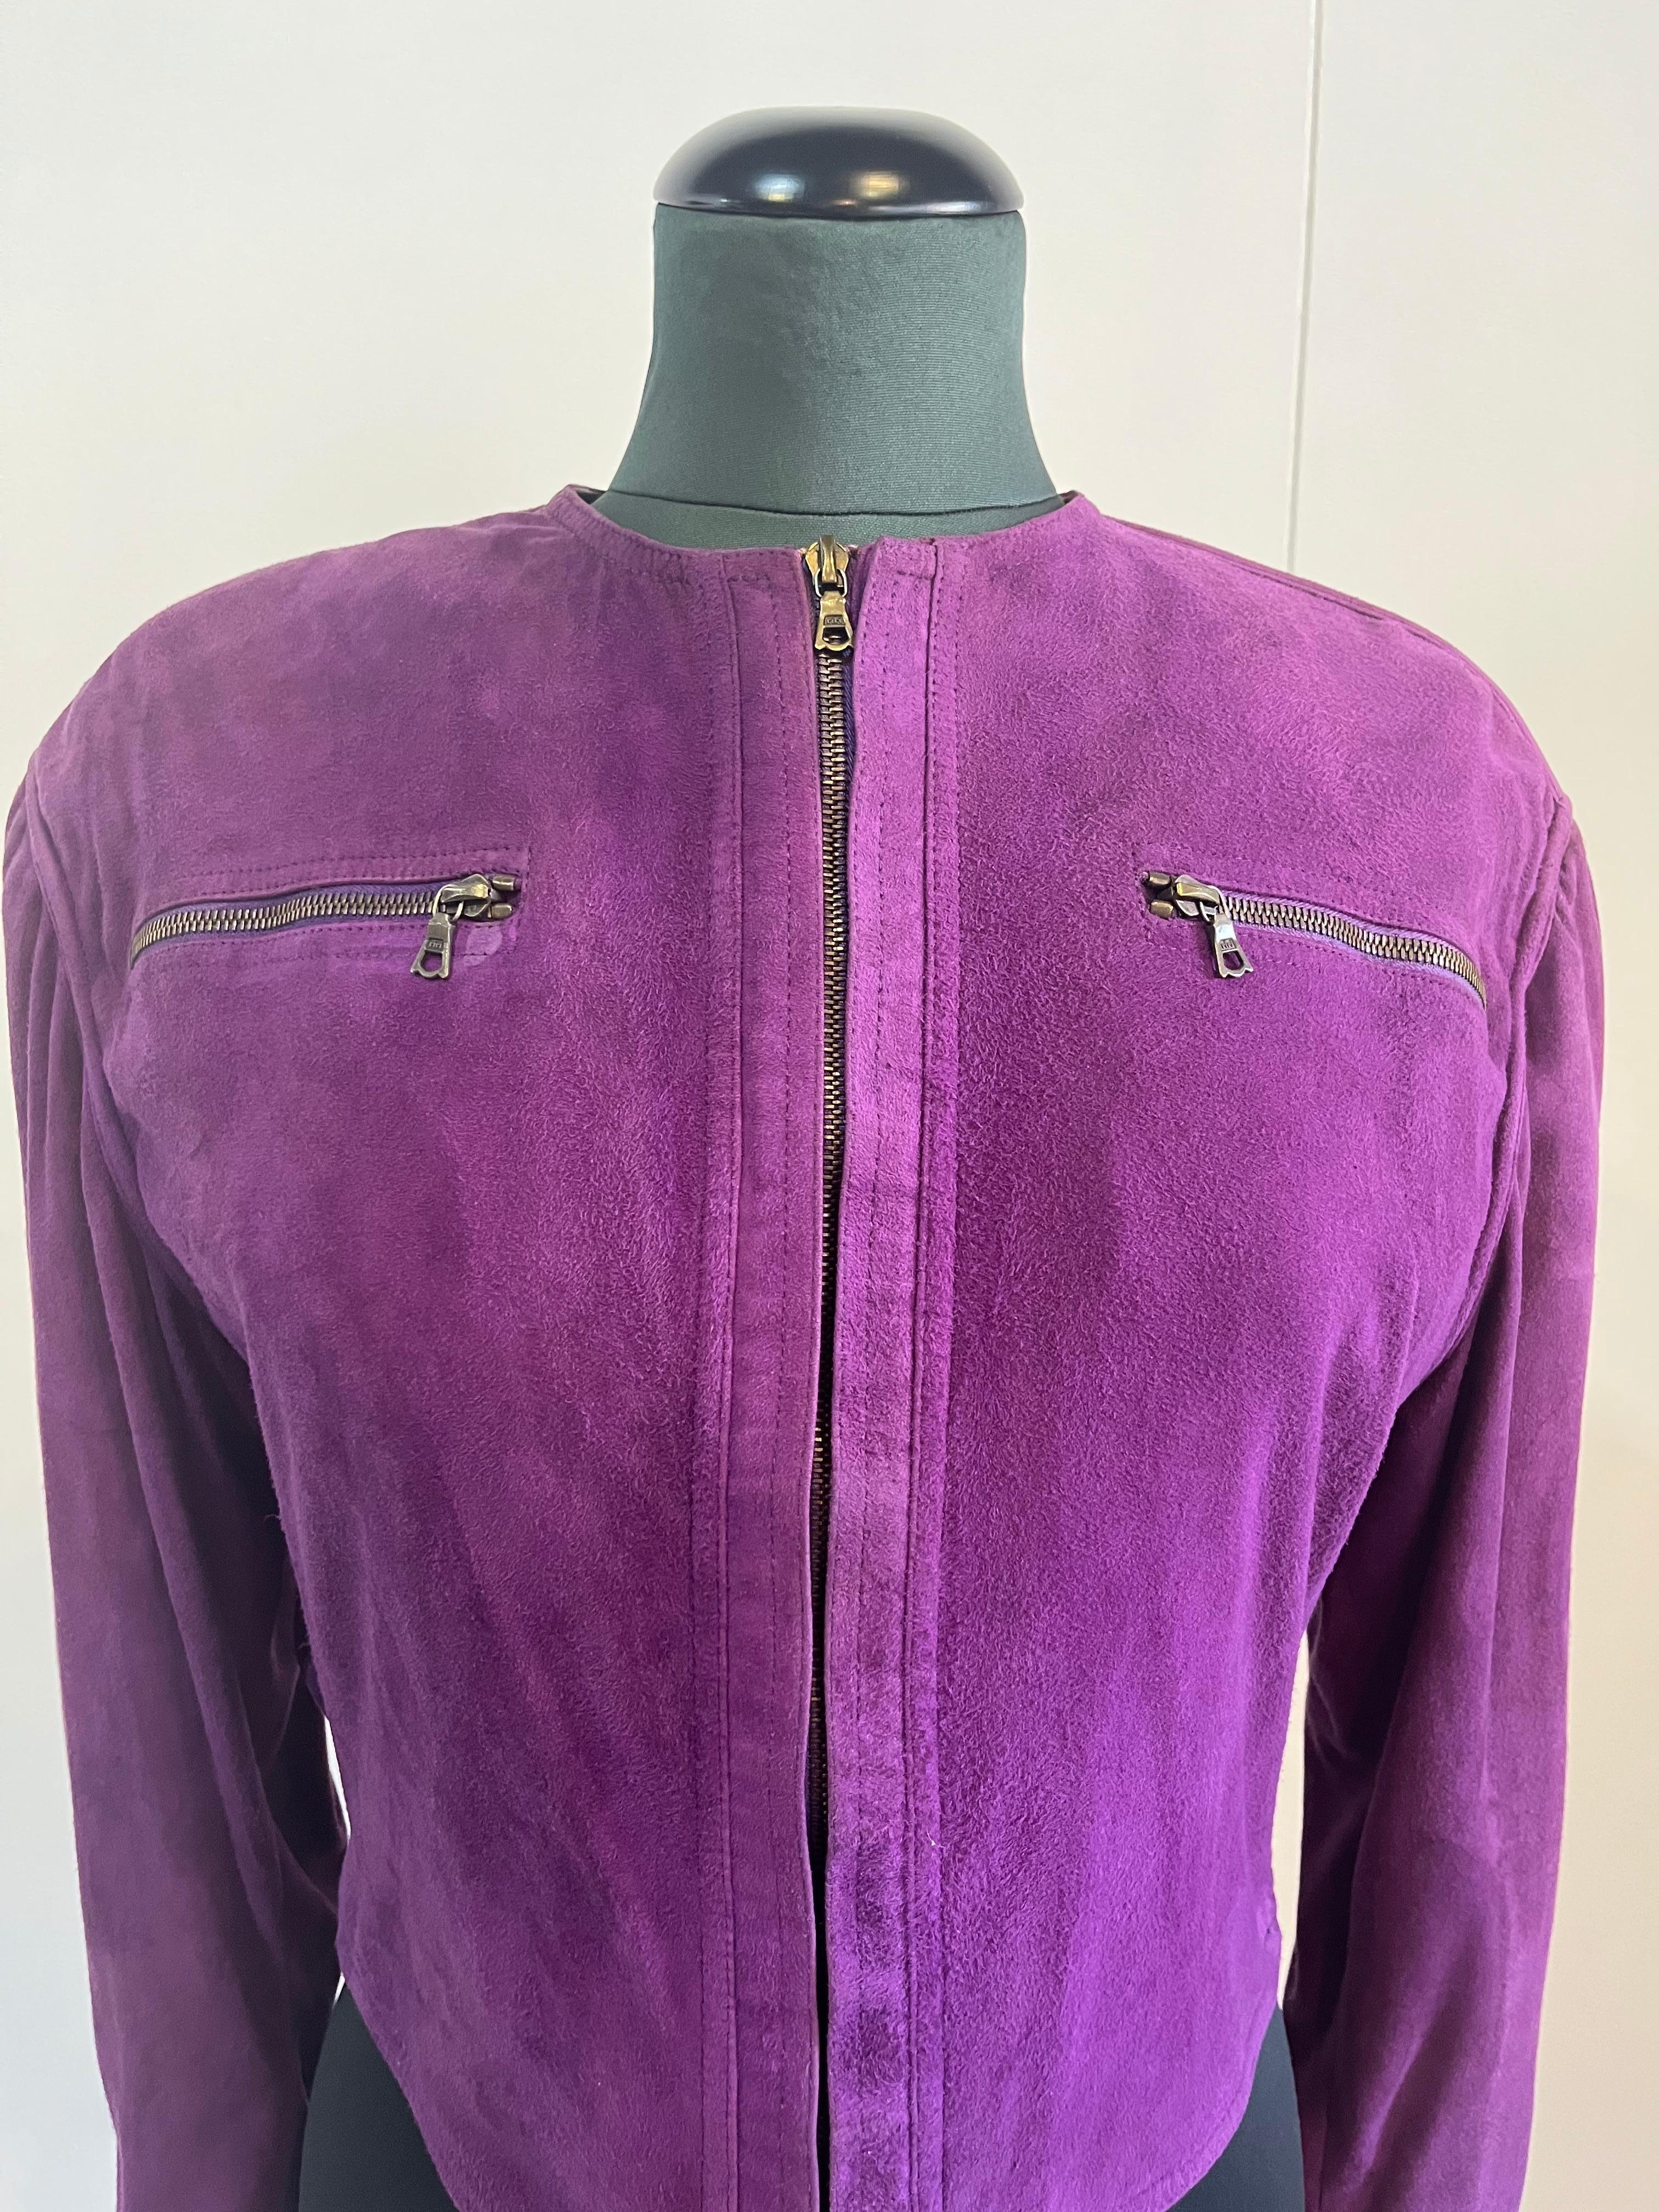 Gianni Versace purple 80s suede jacket. Padded shoulders and zip closure. The jacket has been recolored in the dry cleaners but still has some signs of use over time. The size is not indicated.
Shoulders 50 cm
Sleeve 60 cm
Breast 58 cm
Waist 42